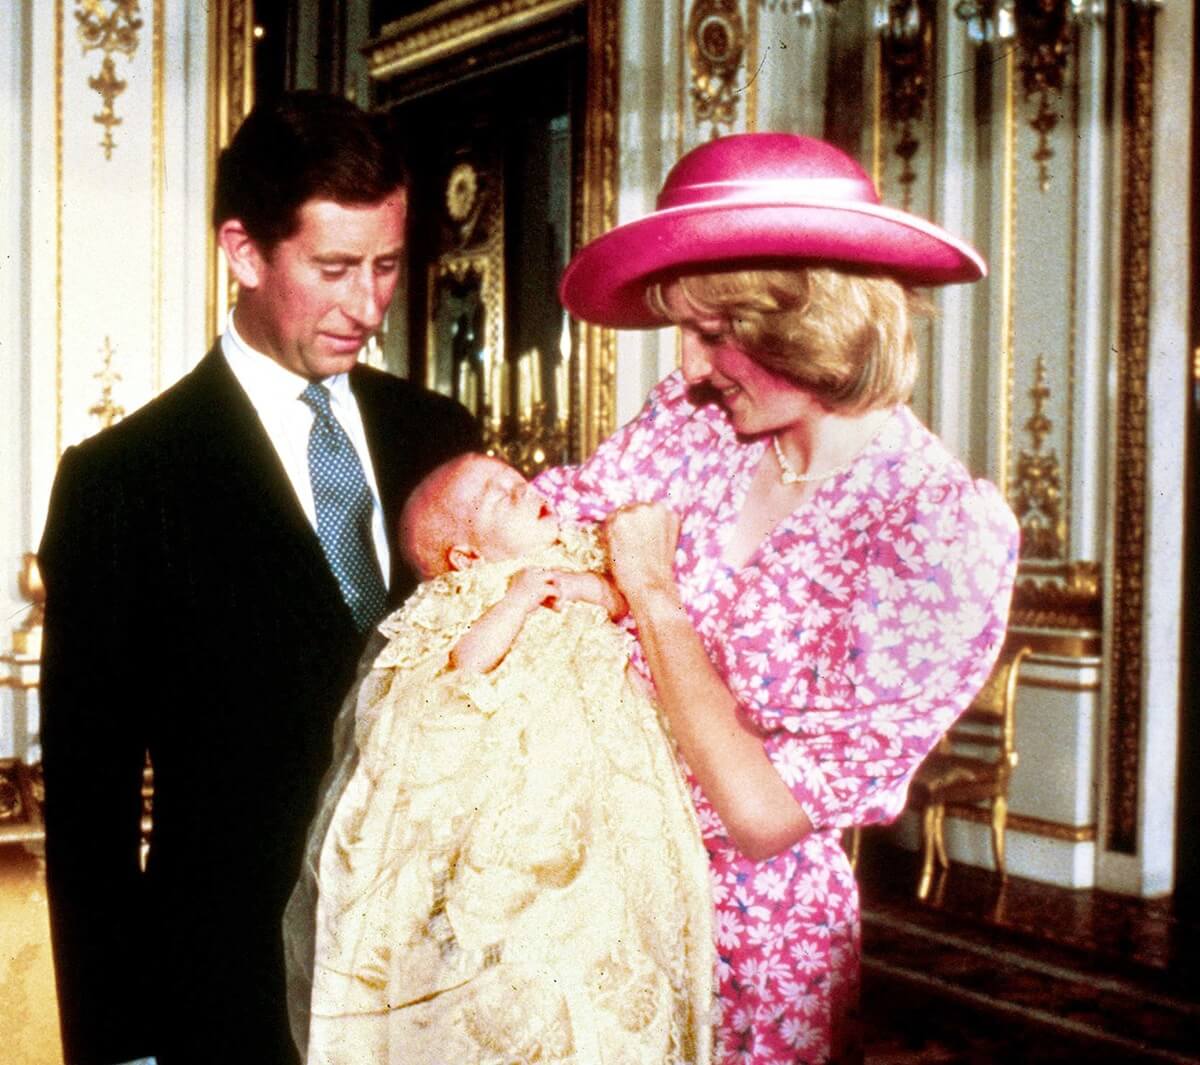 Princess Diana and then-Prince Charles with baby Prince William on the day of his Christening at Buckingham Palace